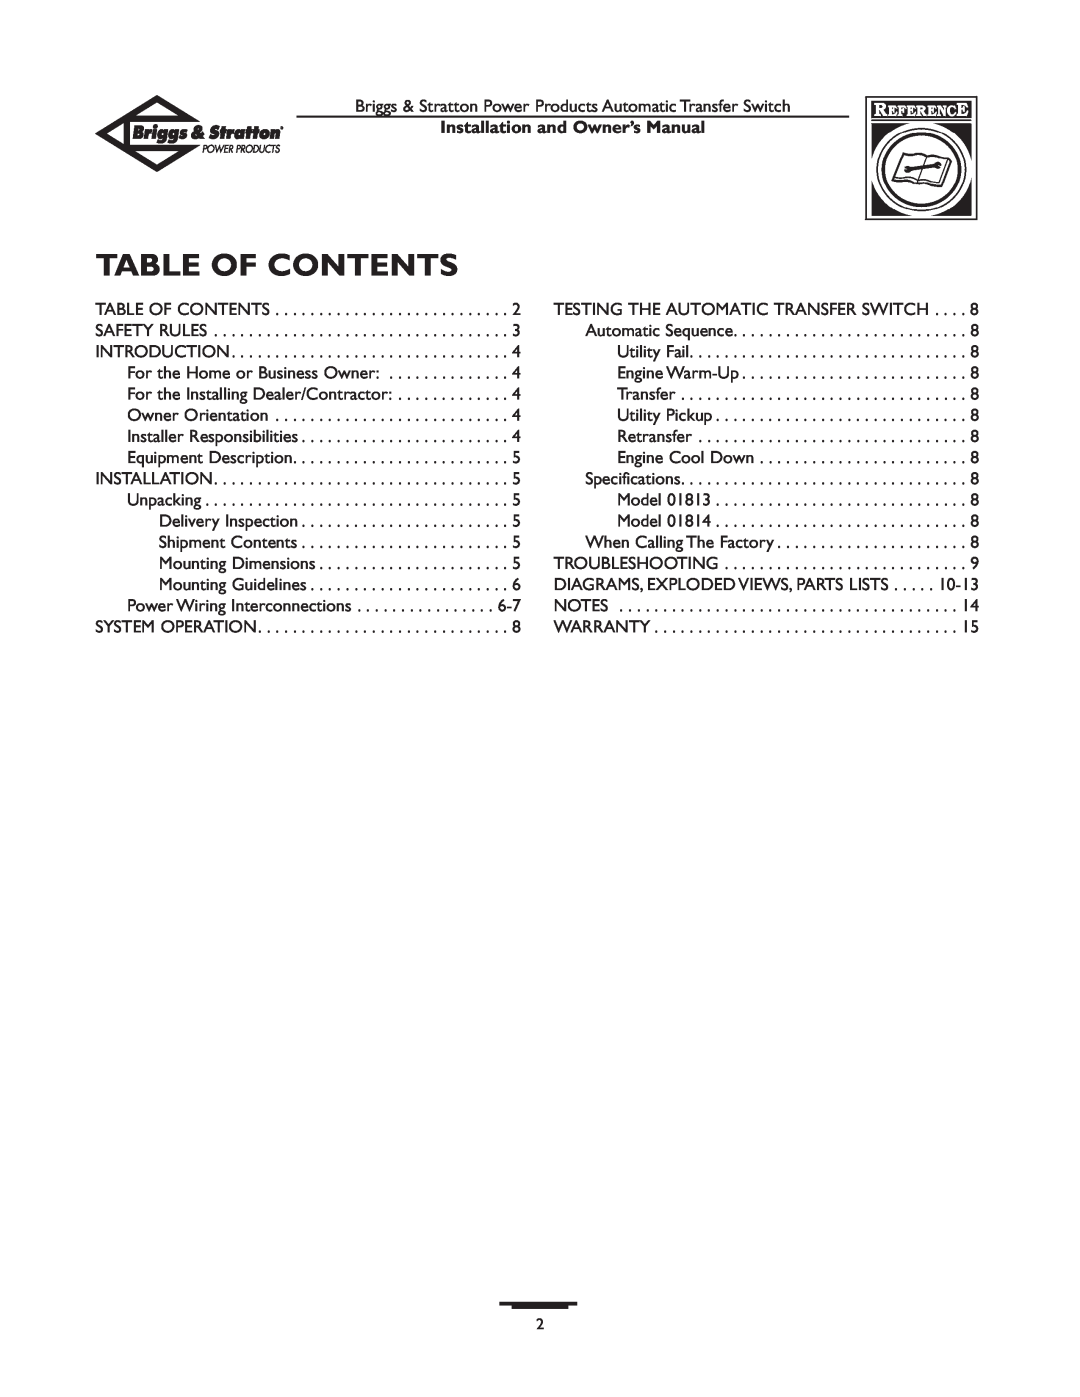 Briggs & Stratton 01814-0, 01813-0 owner manual Table Of Contents, Installation and Owner’s Manual 